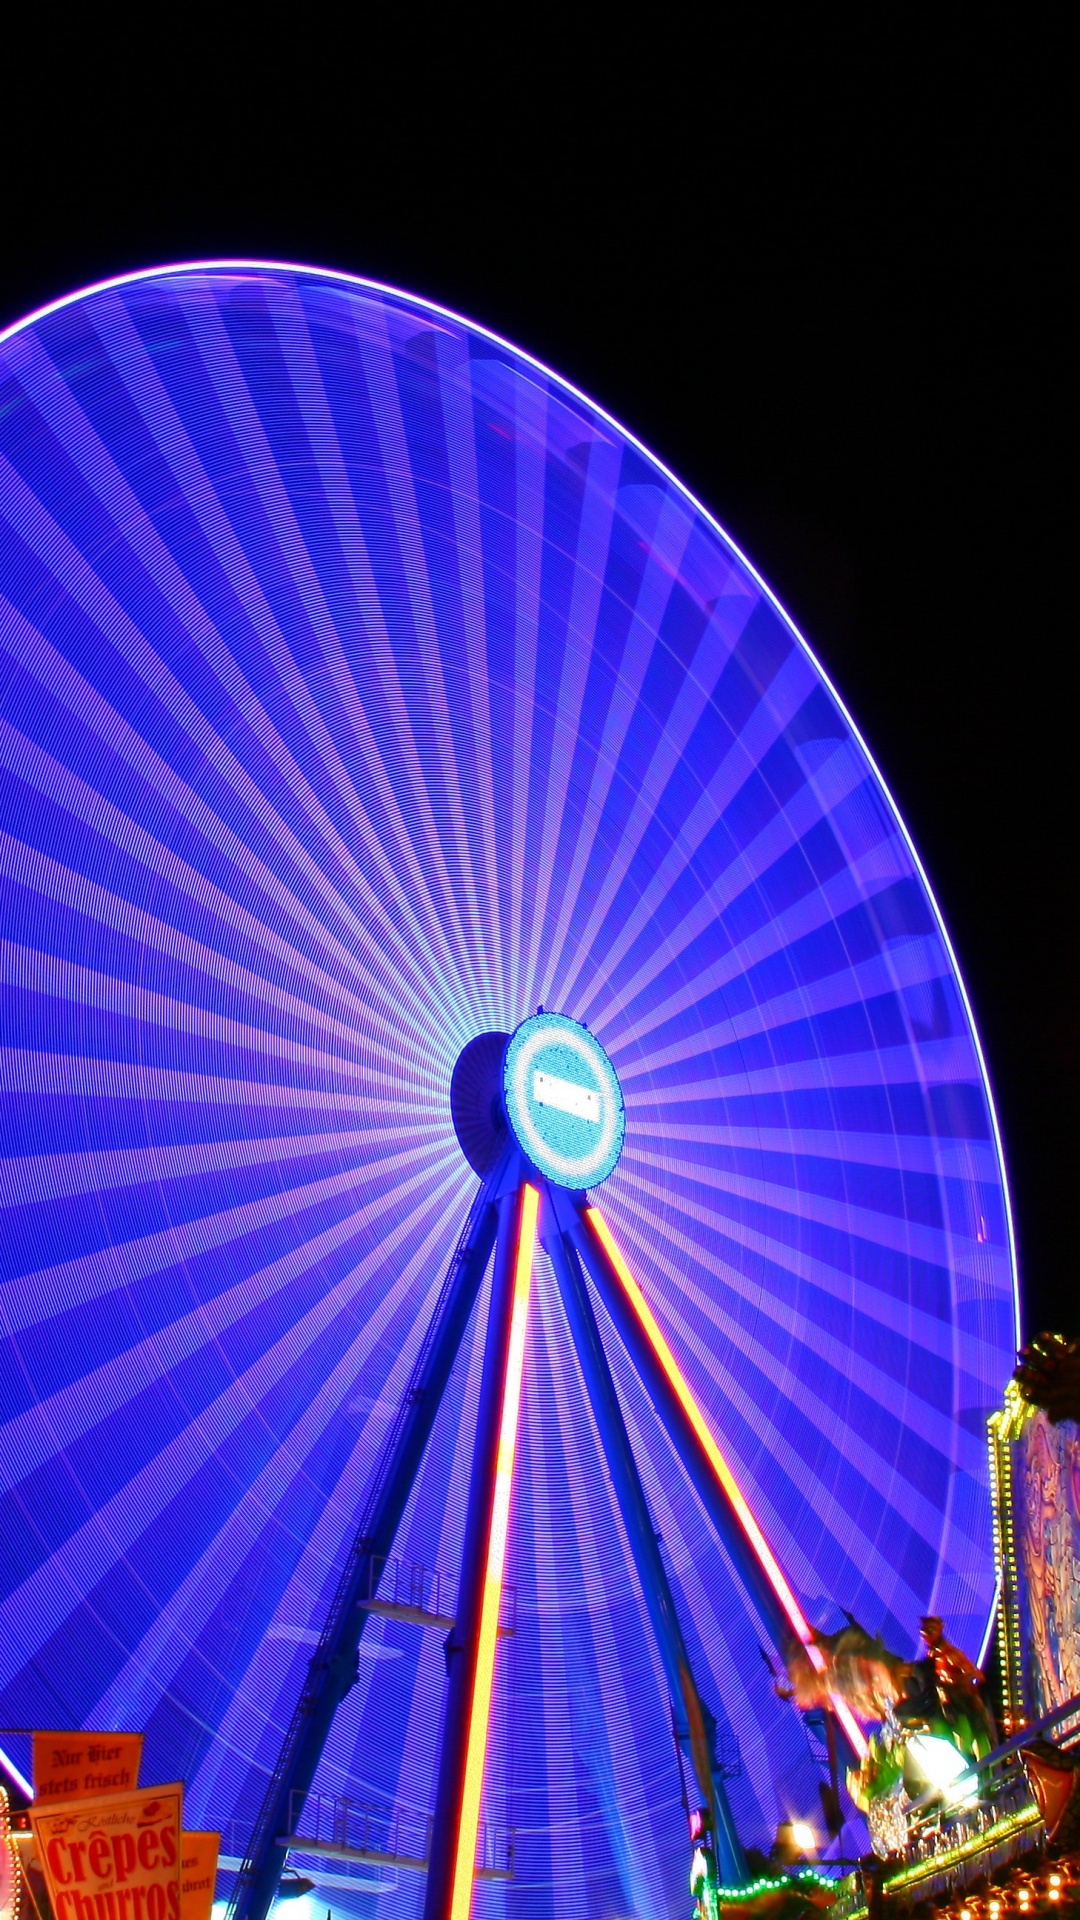 Blue and Red Ferris Wheel During Night Time. Wallpaper in 1080x1920 Resolution